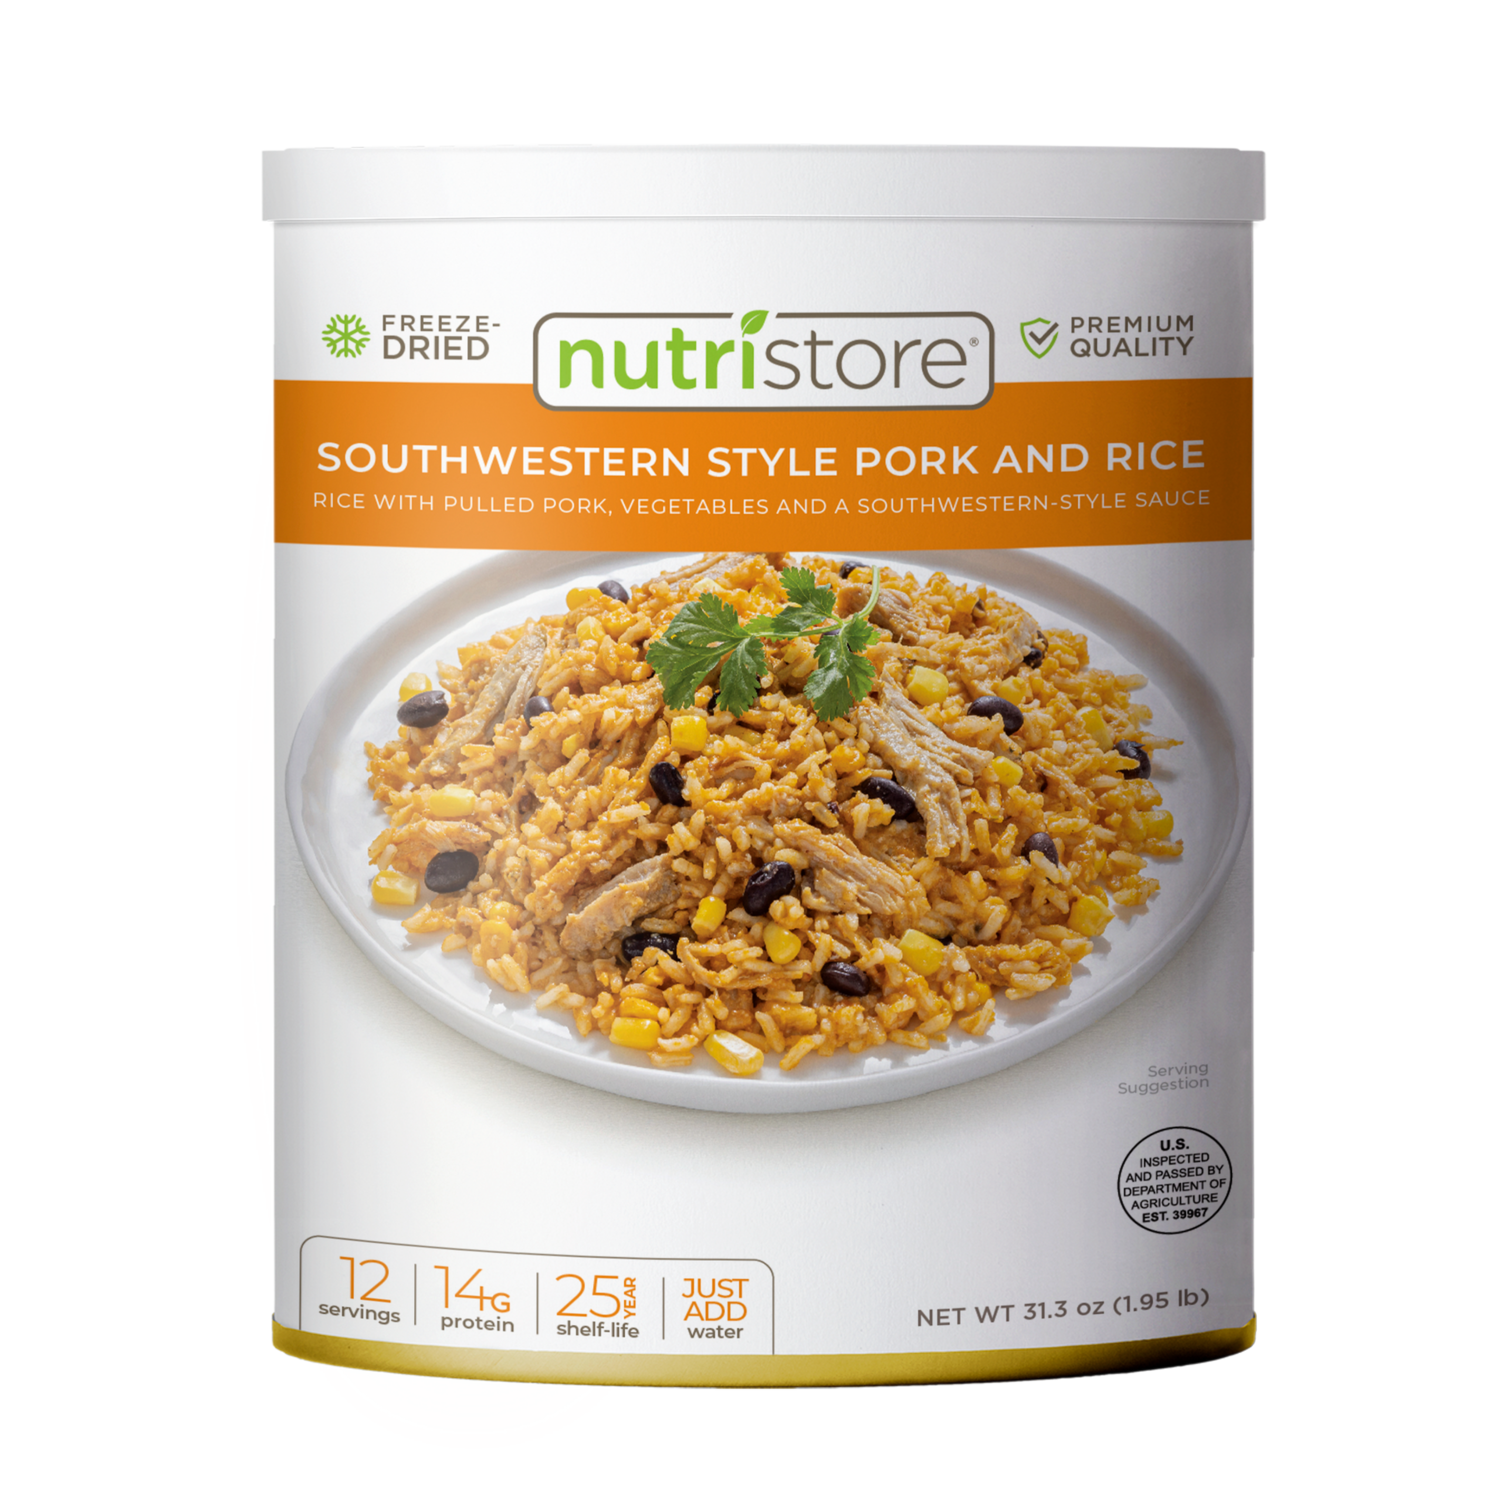 Nutristore - Premium Freeze Dried Southwest Style Pork and Rice